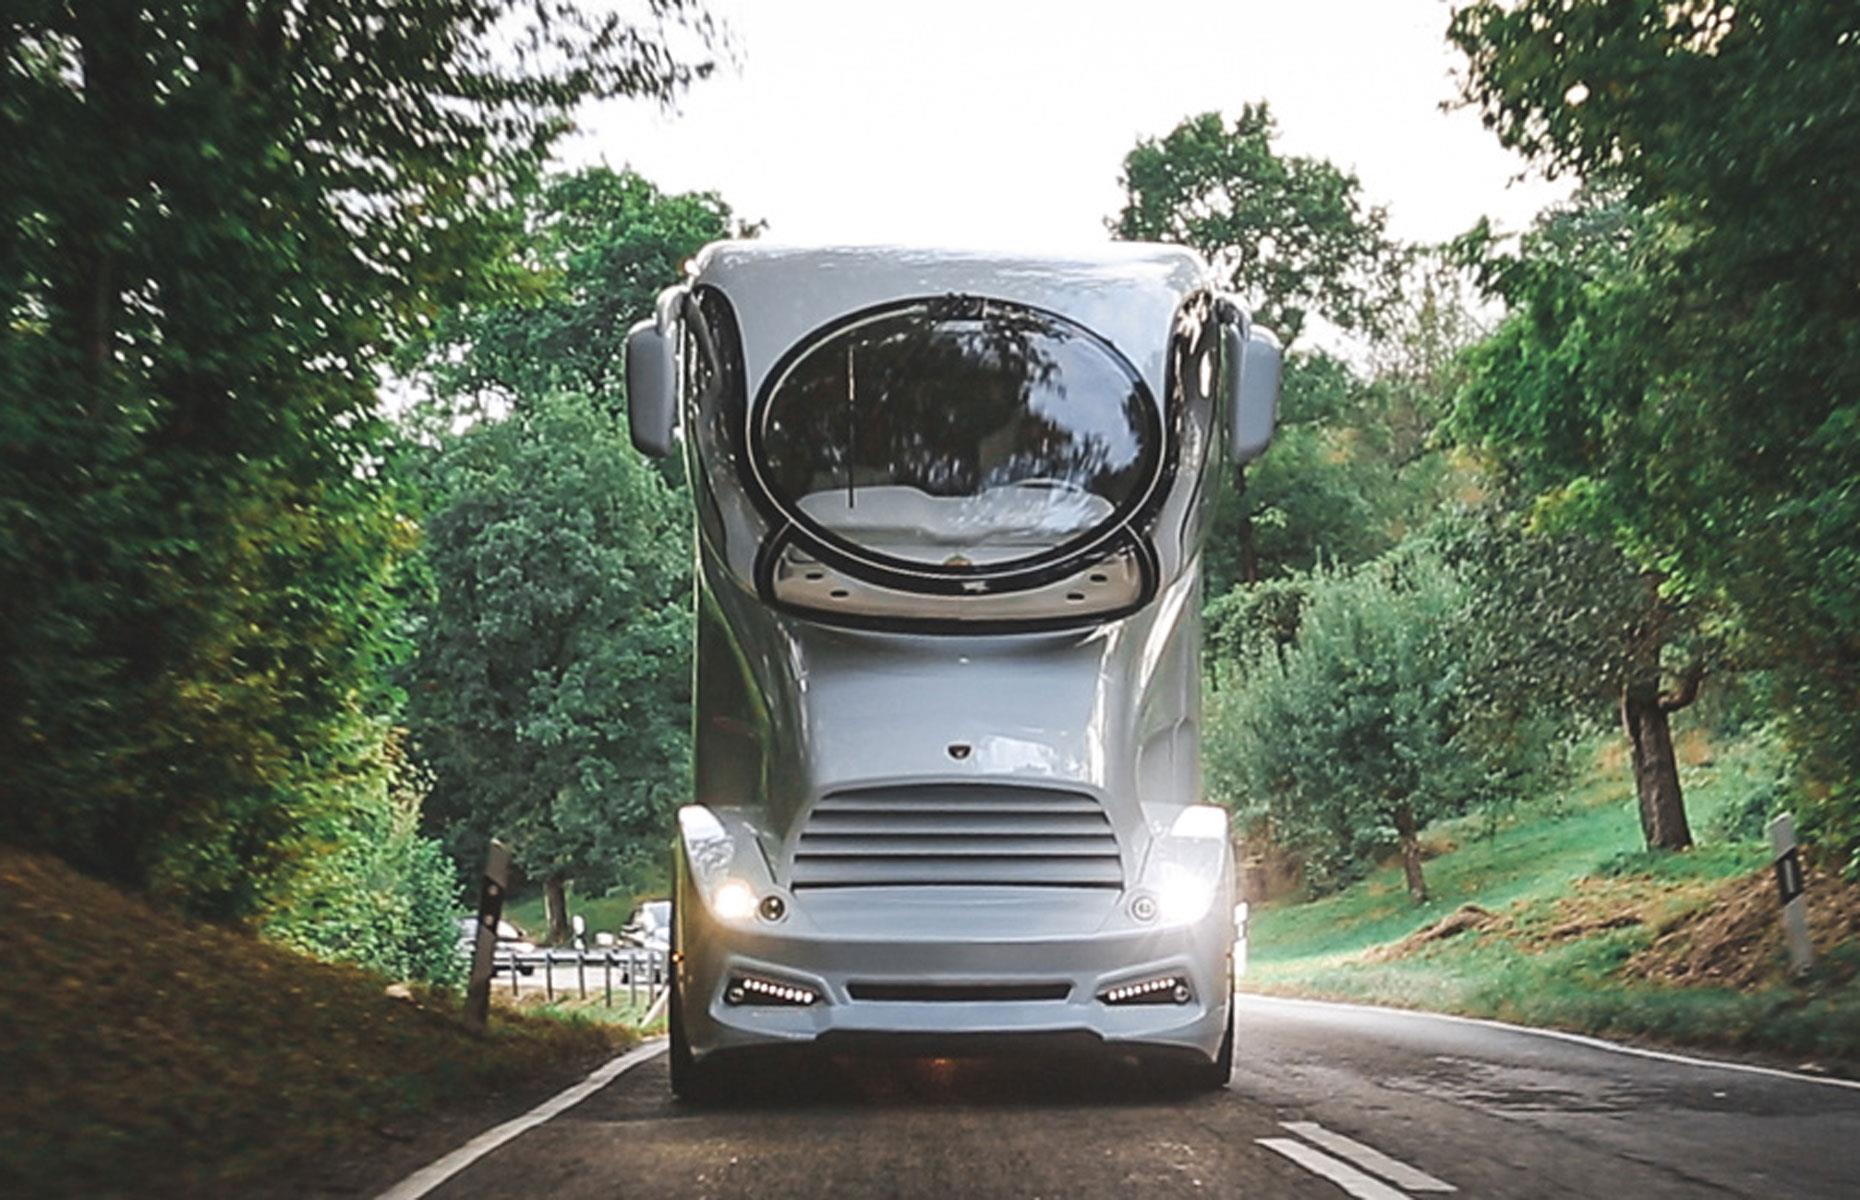 <p>The Ferrari of RVs, the eleMMent palazzo Superior from Austrian manufacturer <a href="https://www.marchi-mobile.com/palazzo-superior/">Marchi Mobile</a> is the last word in luxury road-tripping. And retailing at a <a href="https://robbreport.com/motors/cars/marchi-mobile-elemment-palazzo-superior-rv-1234664979/">reported</a> $3 million, it's among the priciest motorhomes in the world.</p>  <p>The most expensive on record, a $7.7 million marvel from Germany's Volkner that comes with a Bugatti Chiron, is too small for this round-up. In contrast, the eleMMent palazzo Superior is an extraordinary 45 feet long and offers 732 square feet of living space.</p>